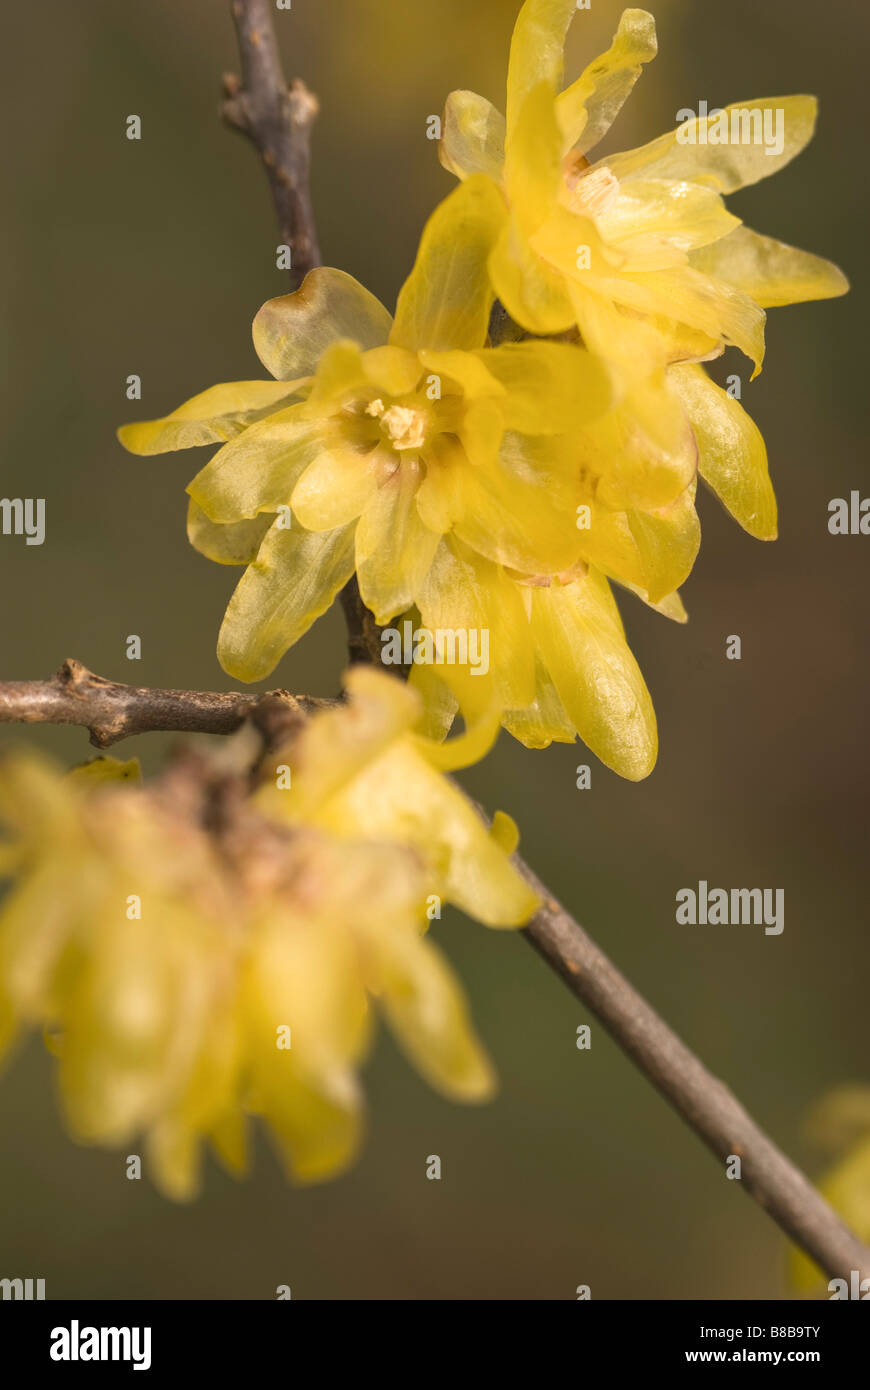 Flowers of Chimonanthus praecox var. luteus syn. concolor (Wintersweet) a winter-blooming shrub. Stock Photo